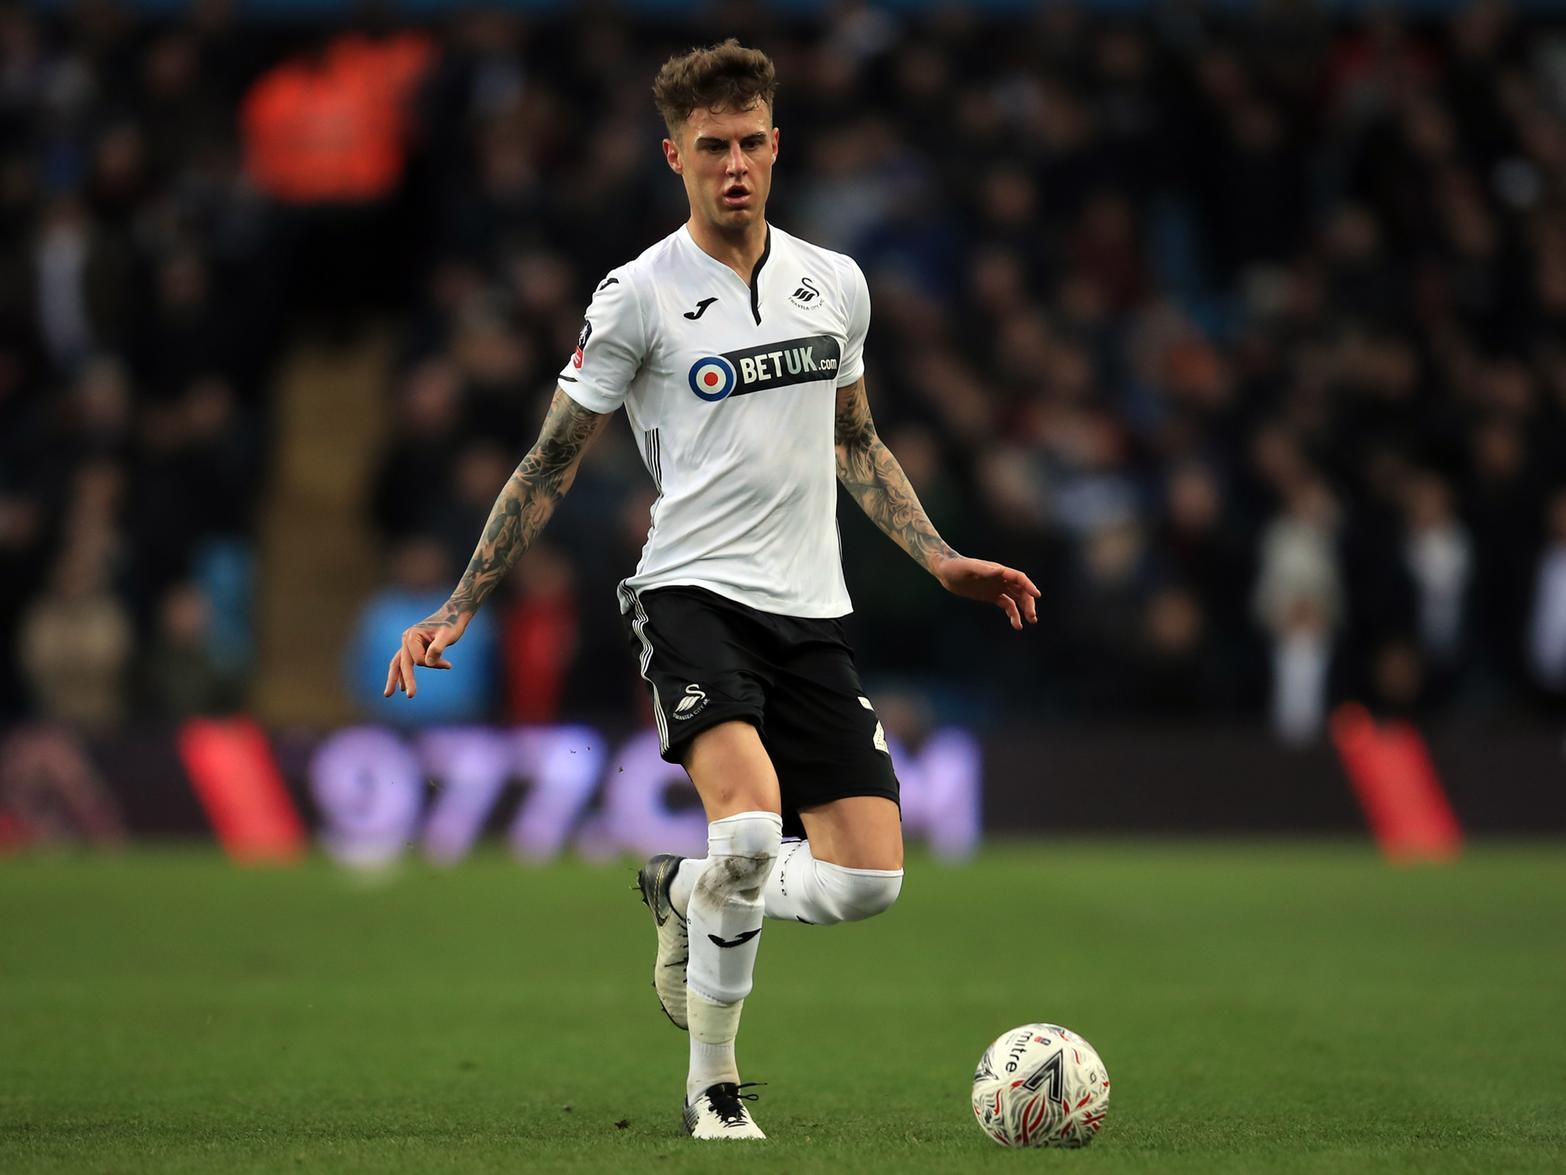 Swansea City boss Steve Cooper has branded his defender Joe Rodon one of the best in the division, and has backed the Wales international to go from strength to strength after recovering from an ankle injury. (BBC Sport)